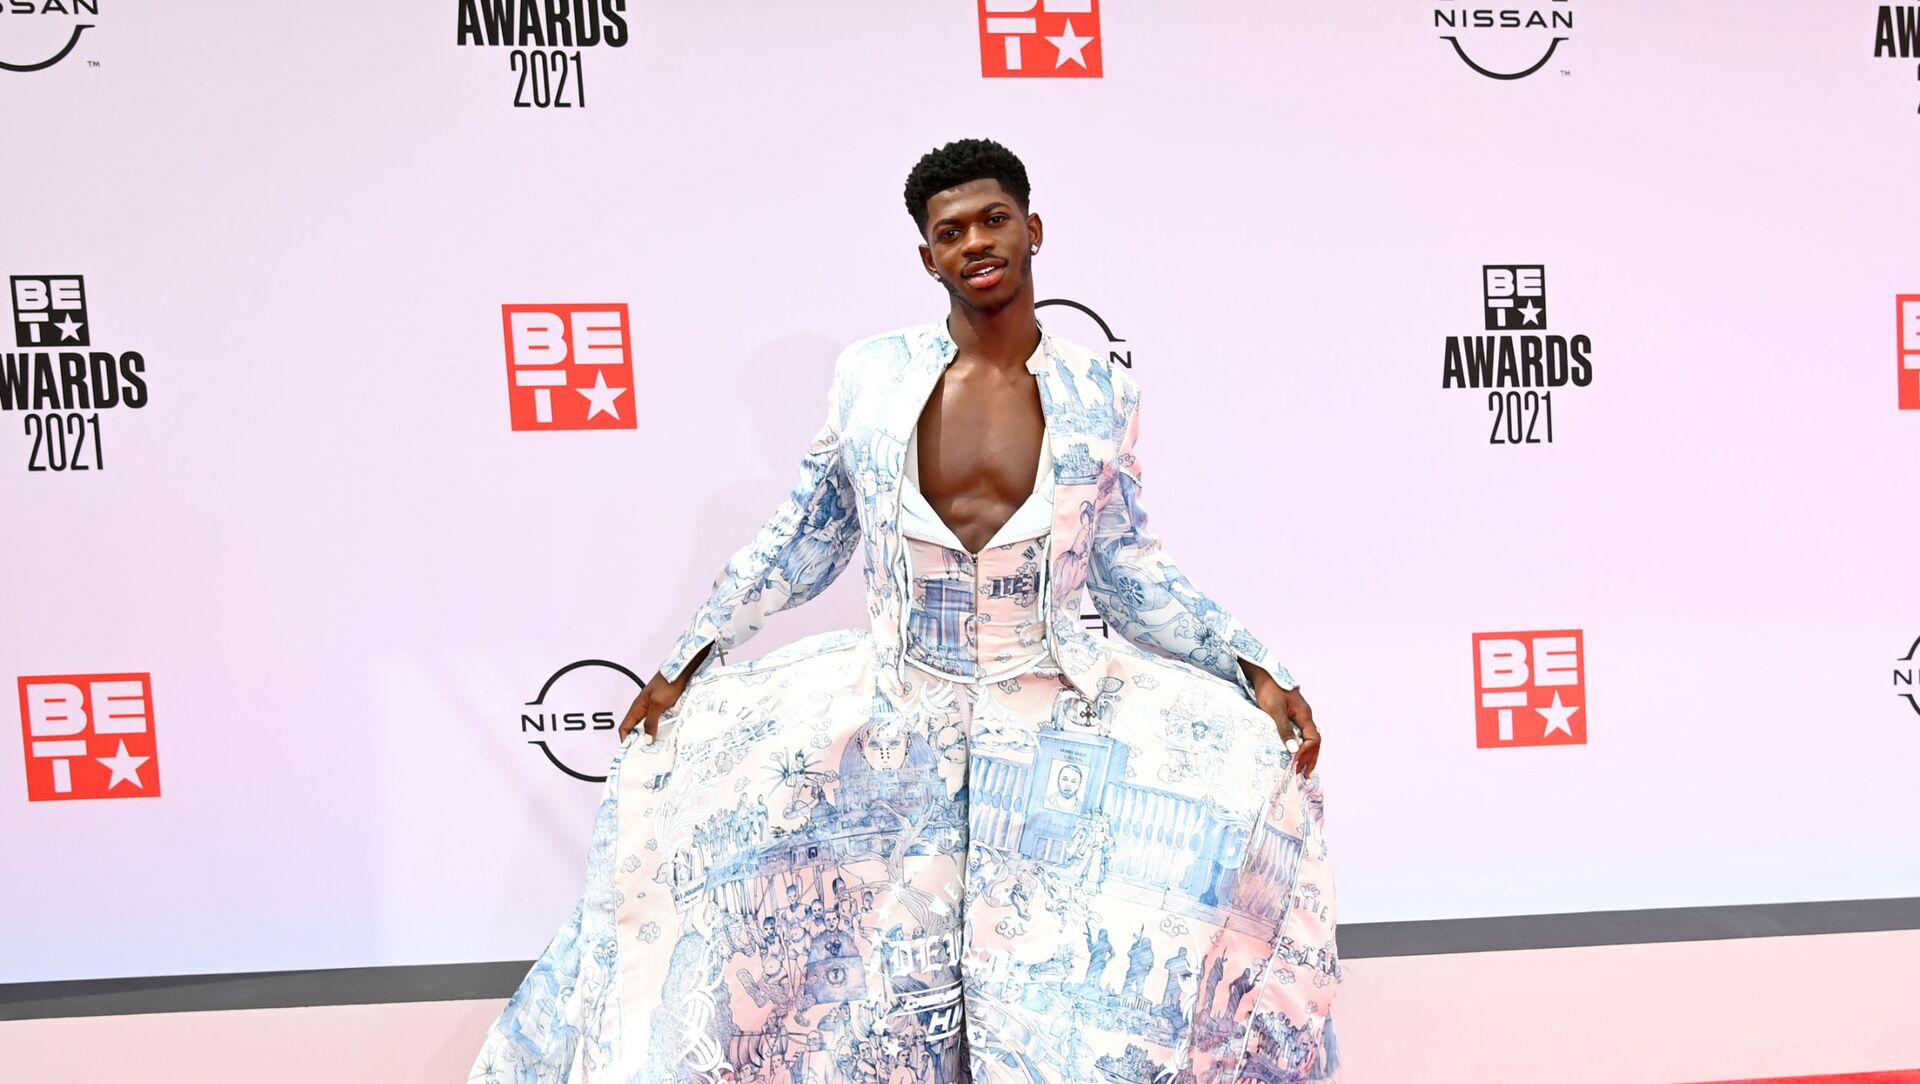 LOS ANGELES, CALIFORNIA - JUNE 27: Lil Nas X attends the BET Awards 2021 at Microsoft Theater on June 27, 2021 in Los Angeles, California - Sputnik International, 1920, 03.09.2021